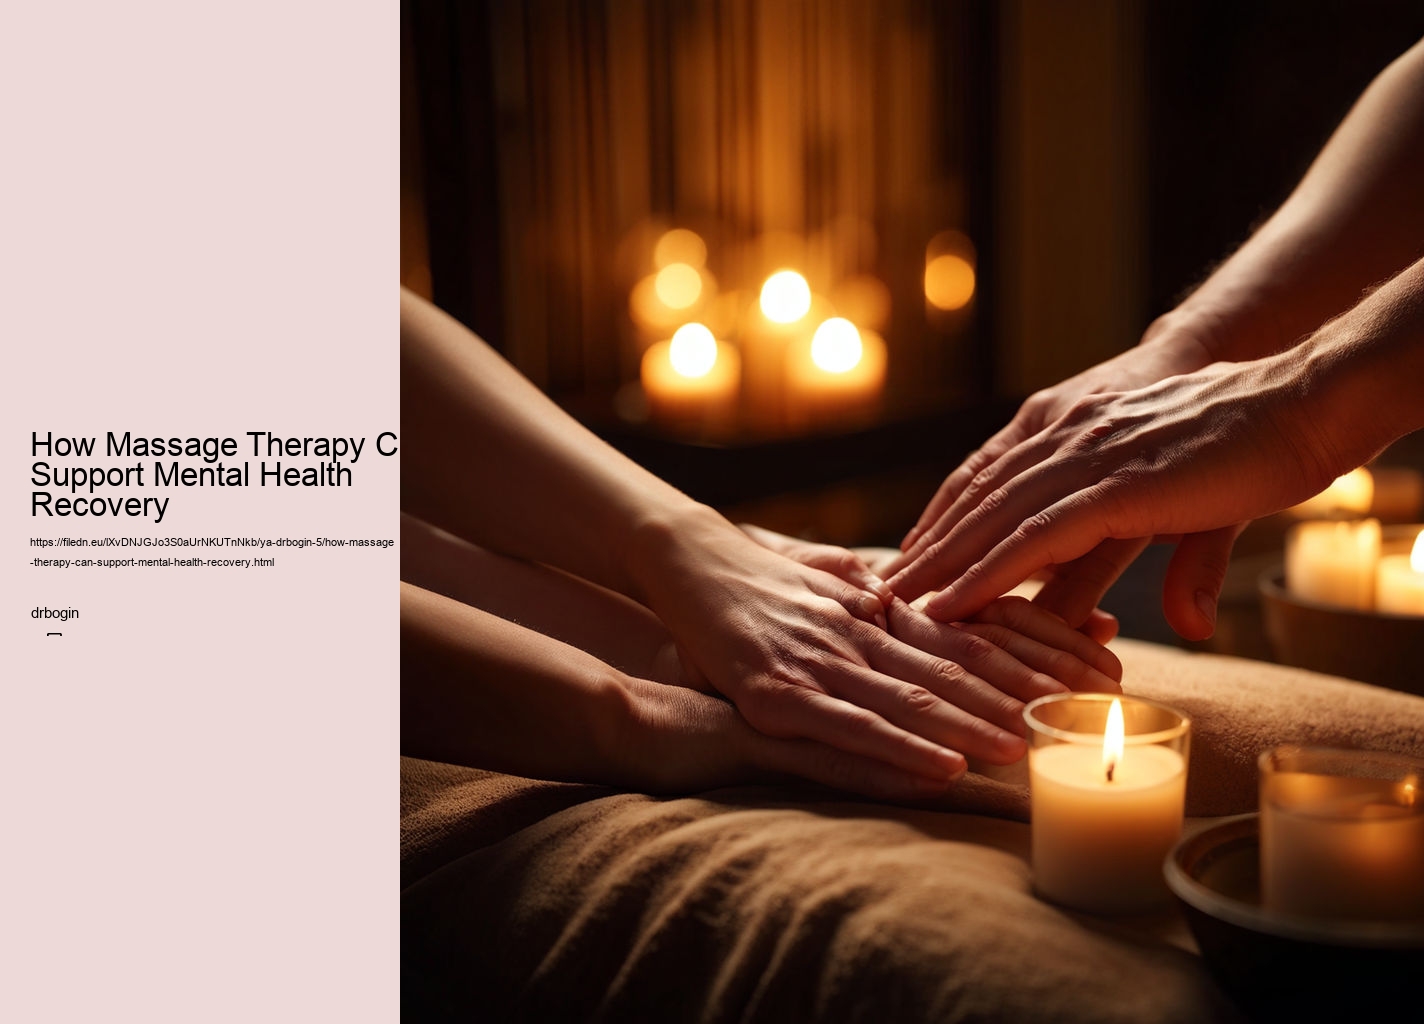 How Massage Therapy Can Support Mental Health Recovery